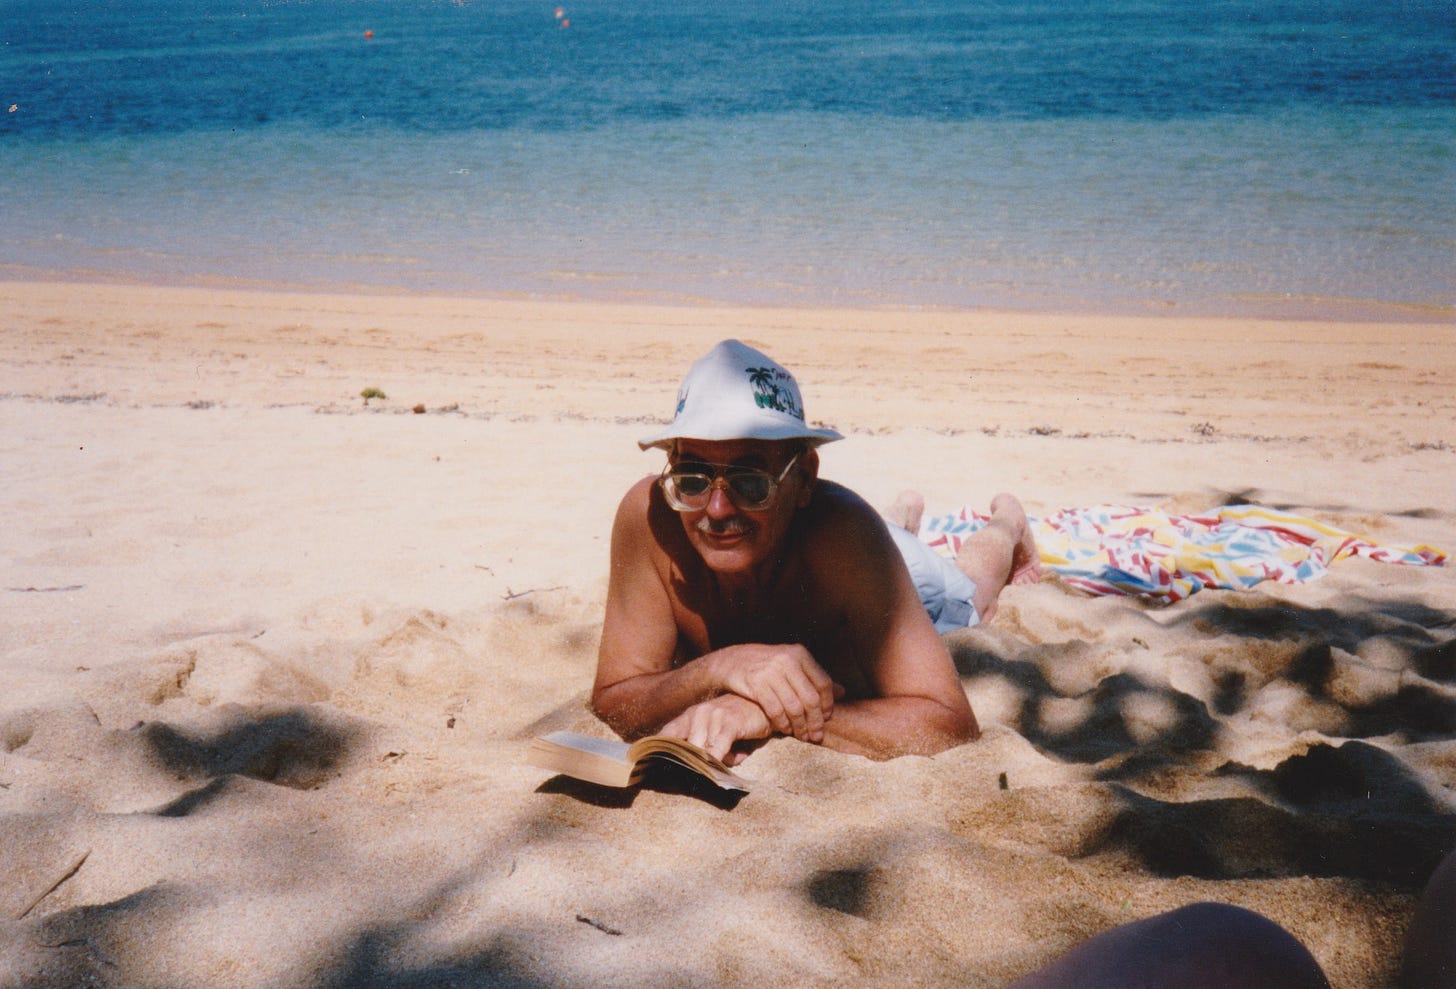 My father, Joseph Campbell, on a beach somewhere reading a book